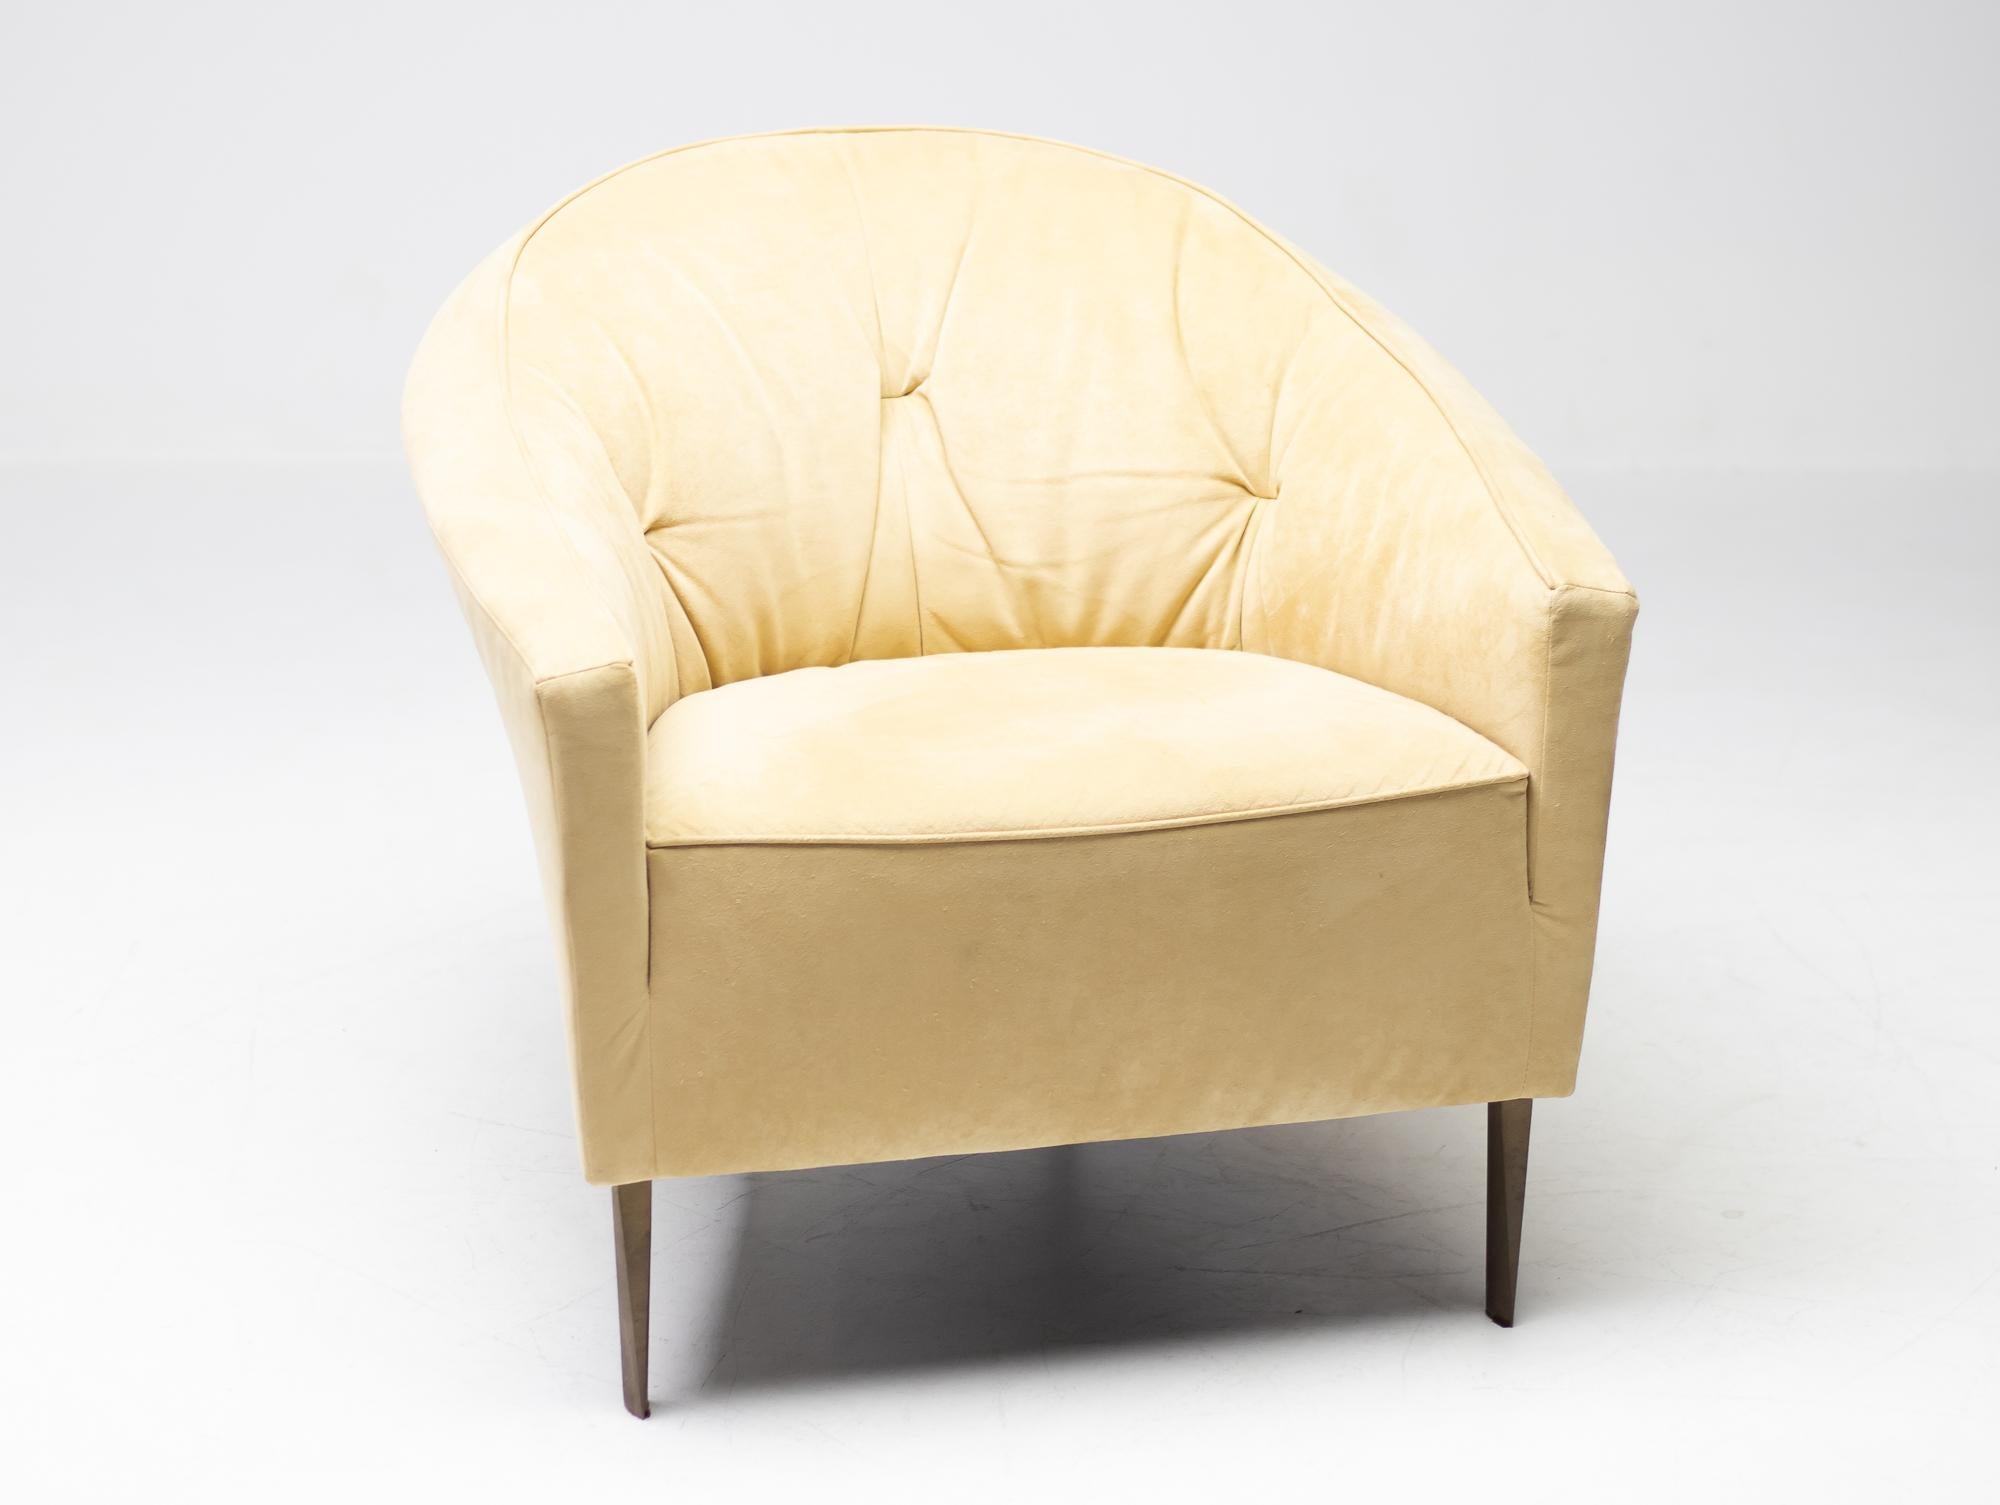 Very elegant sweeping lounge chair by Ligne Roset with cast bronze legs in yellow Alcantara.
Some wear to the Alcantara but very well maintained and free of stains.
Very rare piece, marked with Ligne Roset label.

Please note that we do advise